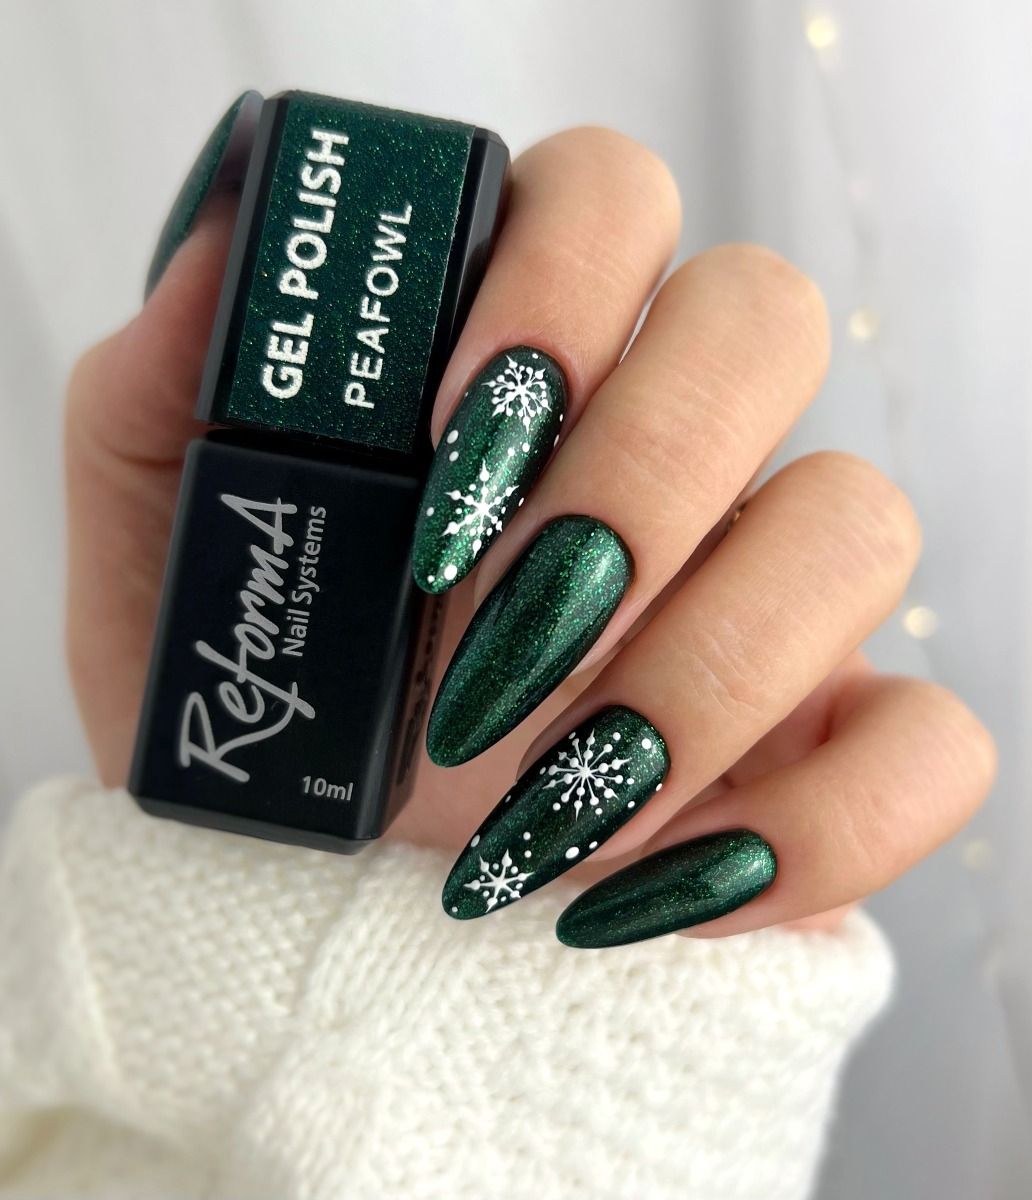 25 Stunning And Elegant Emerald Green Nail Designs For You - Women Fashion  Lifestyle Blog Shinecoco.com | Green nail designs, Green nails, Feather  nails